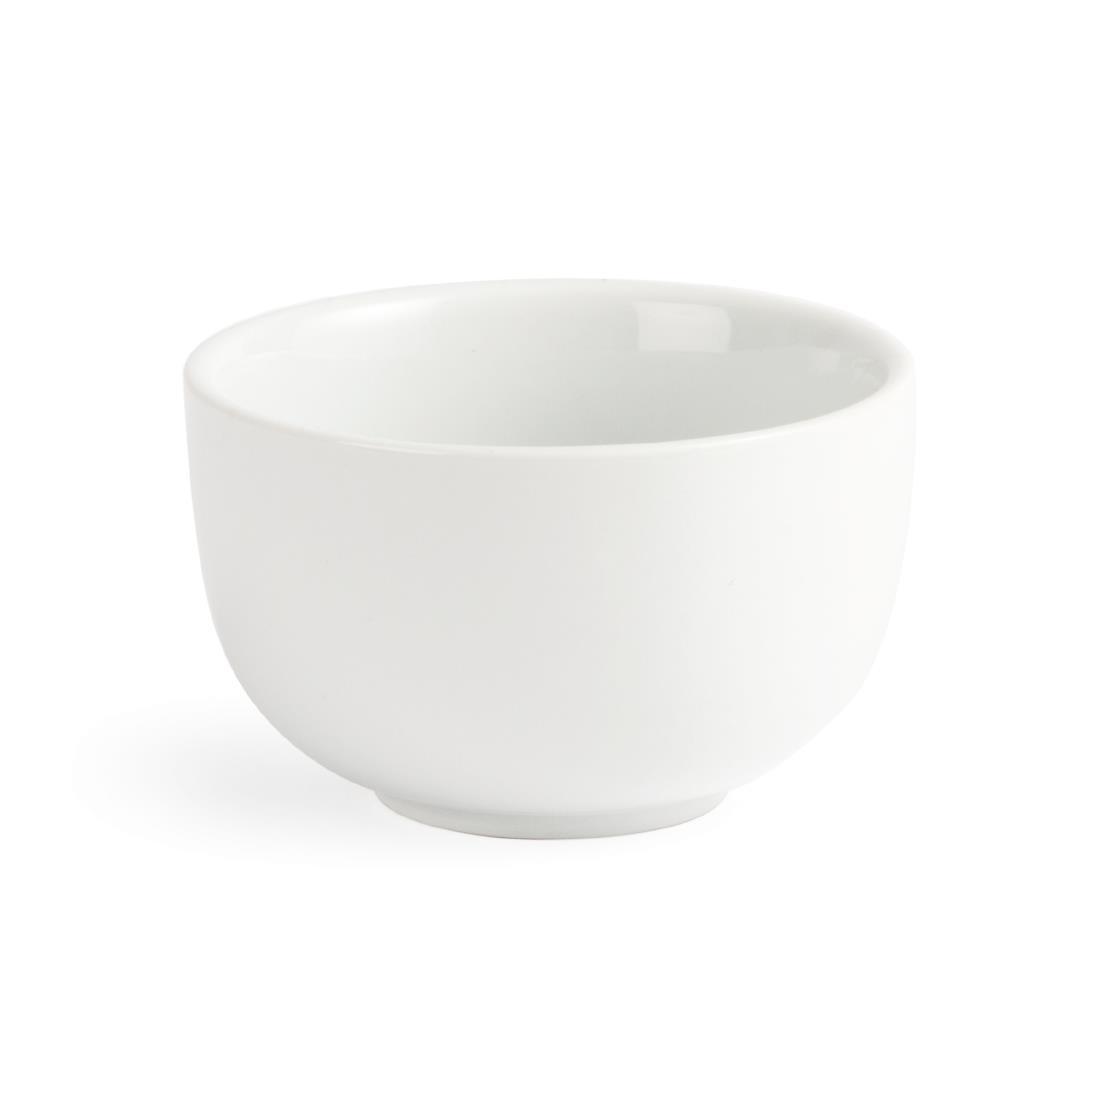 Olympia Whiteware Sugar Bowls 95mm 200ml (Pack of 12) - C250  - 1